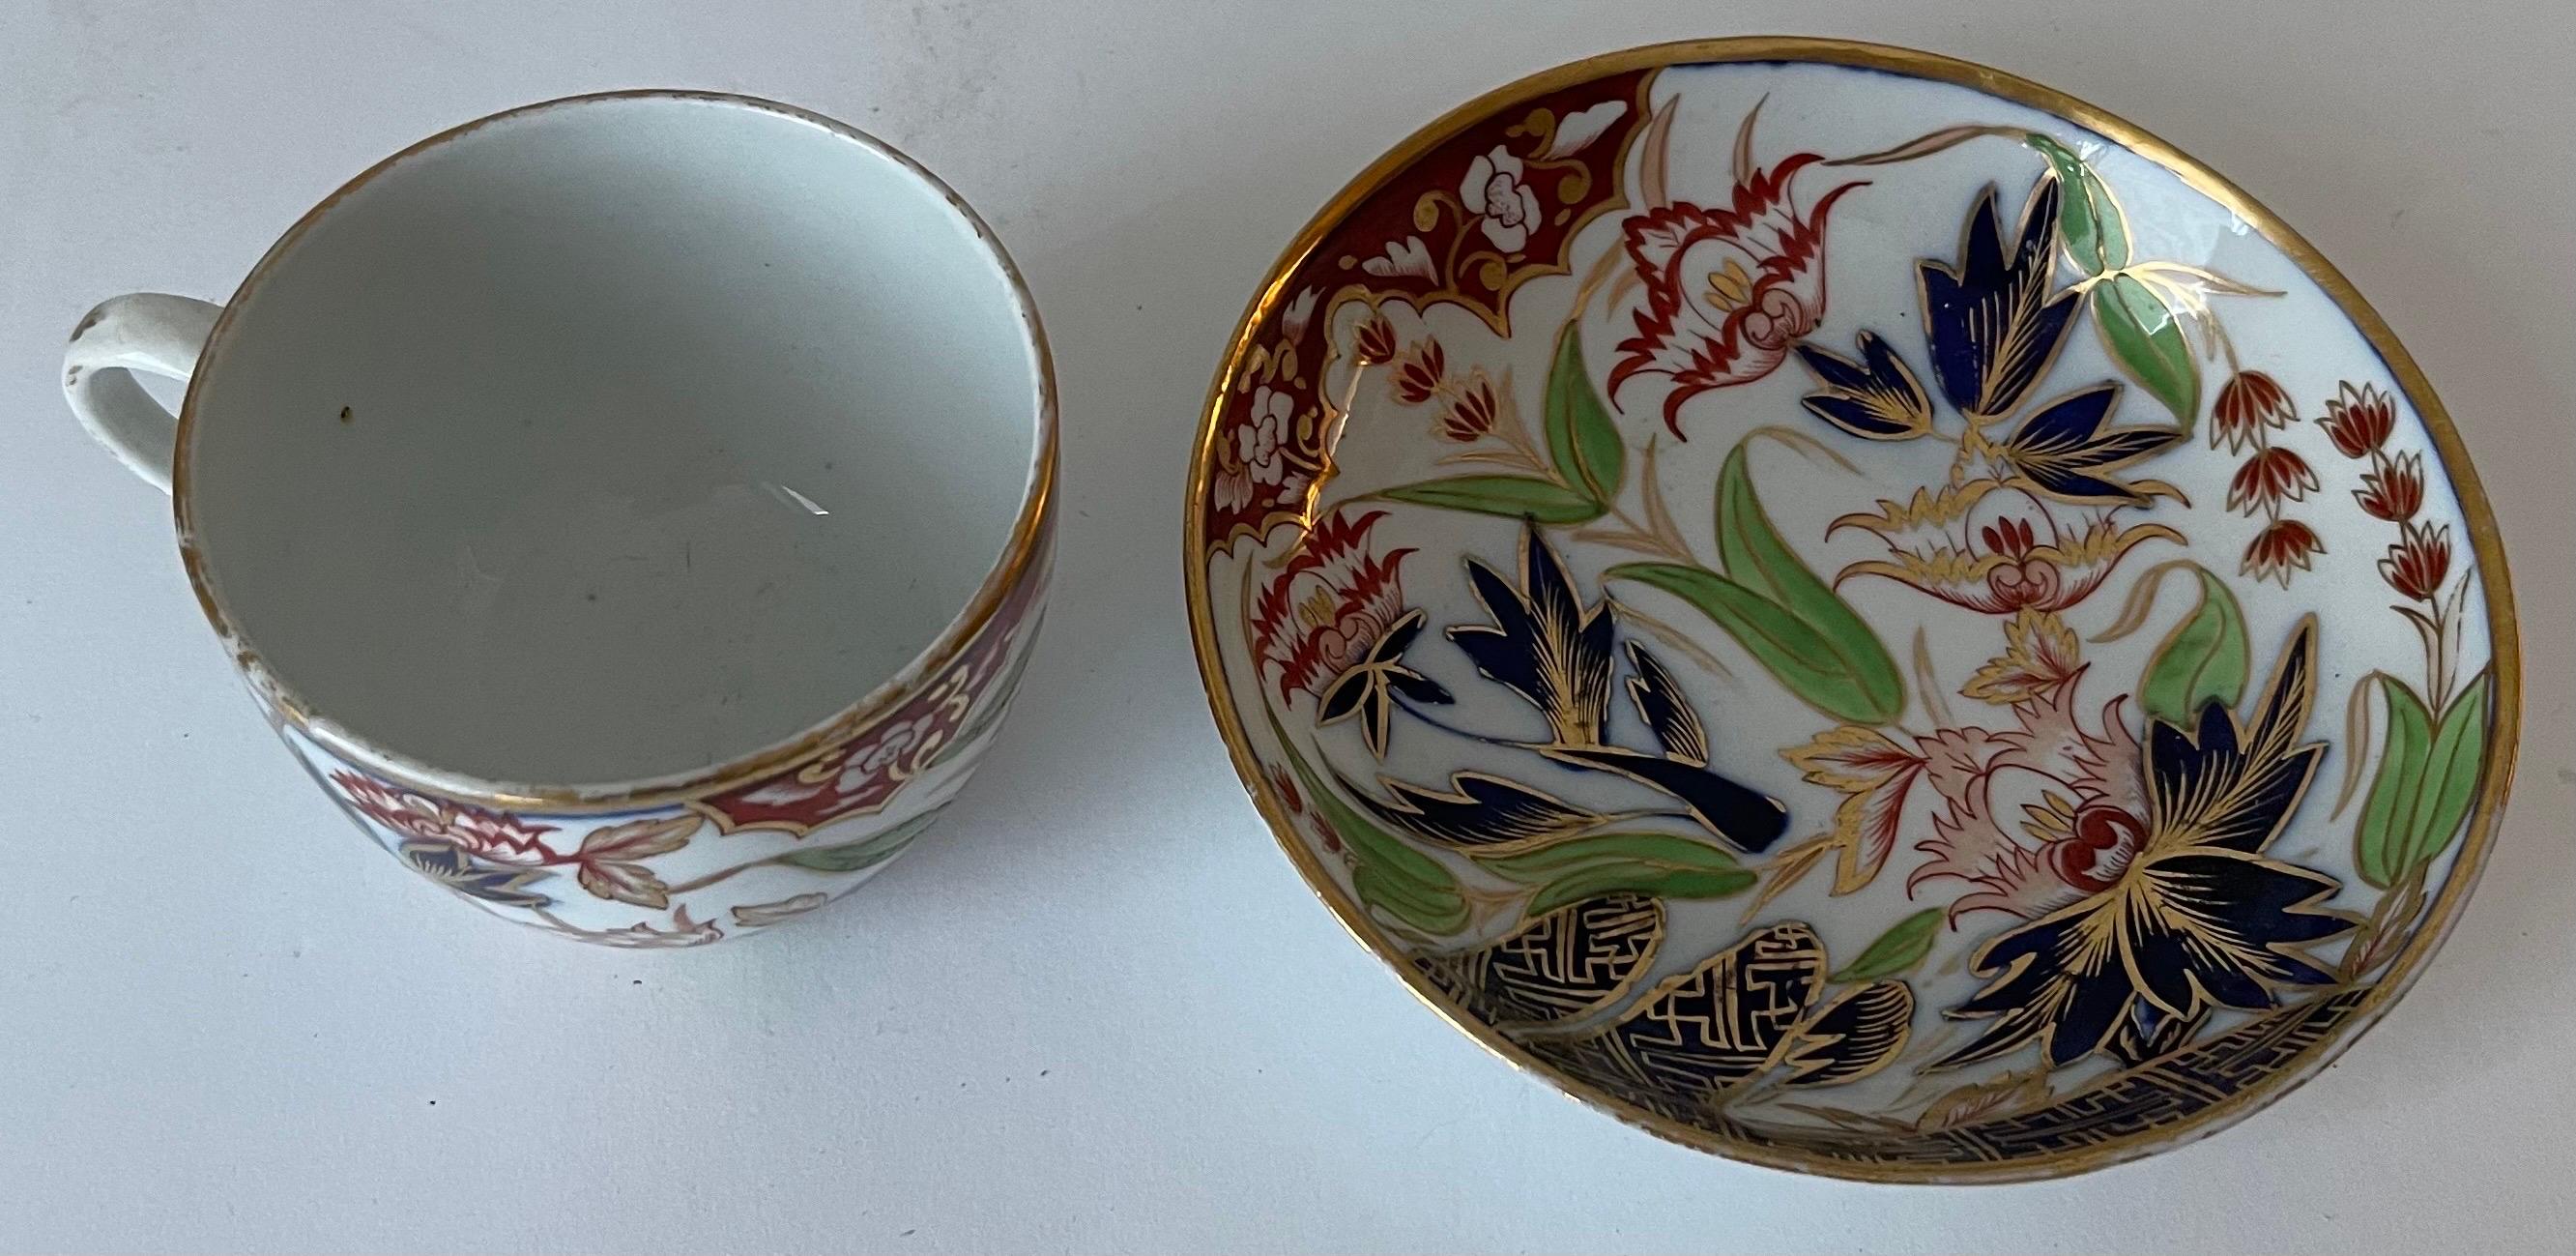 Hand-Painted Coalport John Rose Thumb and Finger Pattern Teacup & Saucer For Sale